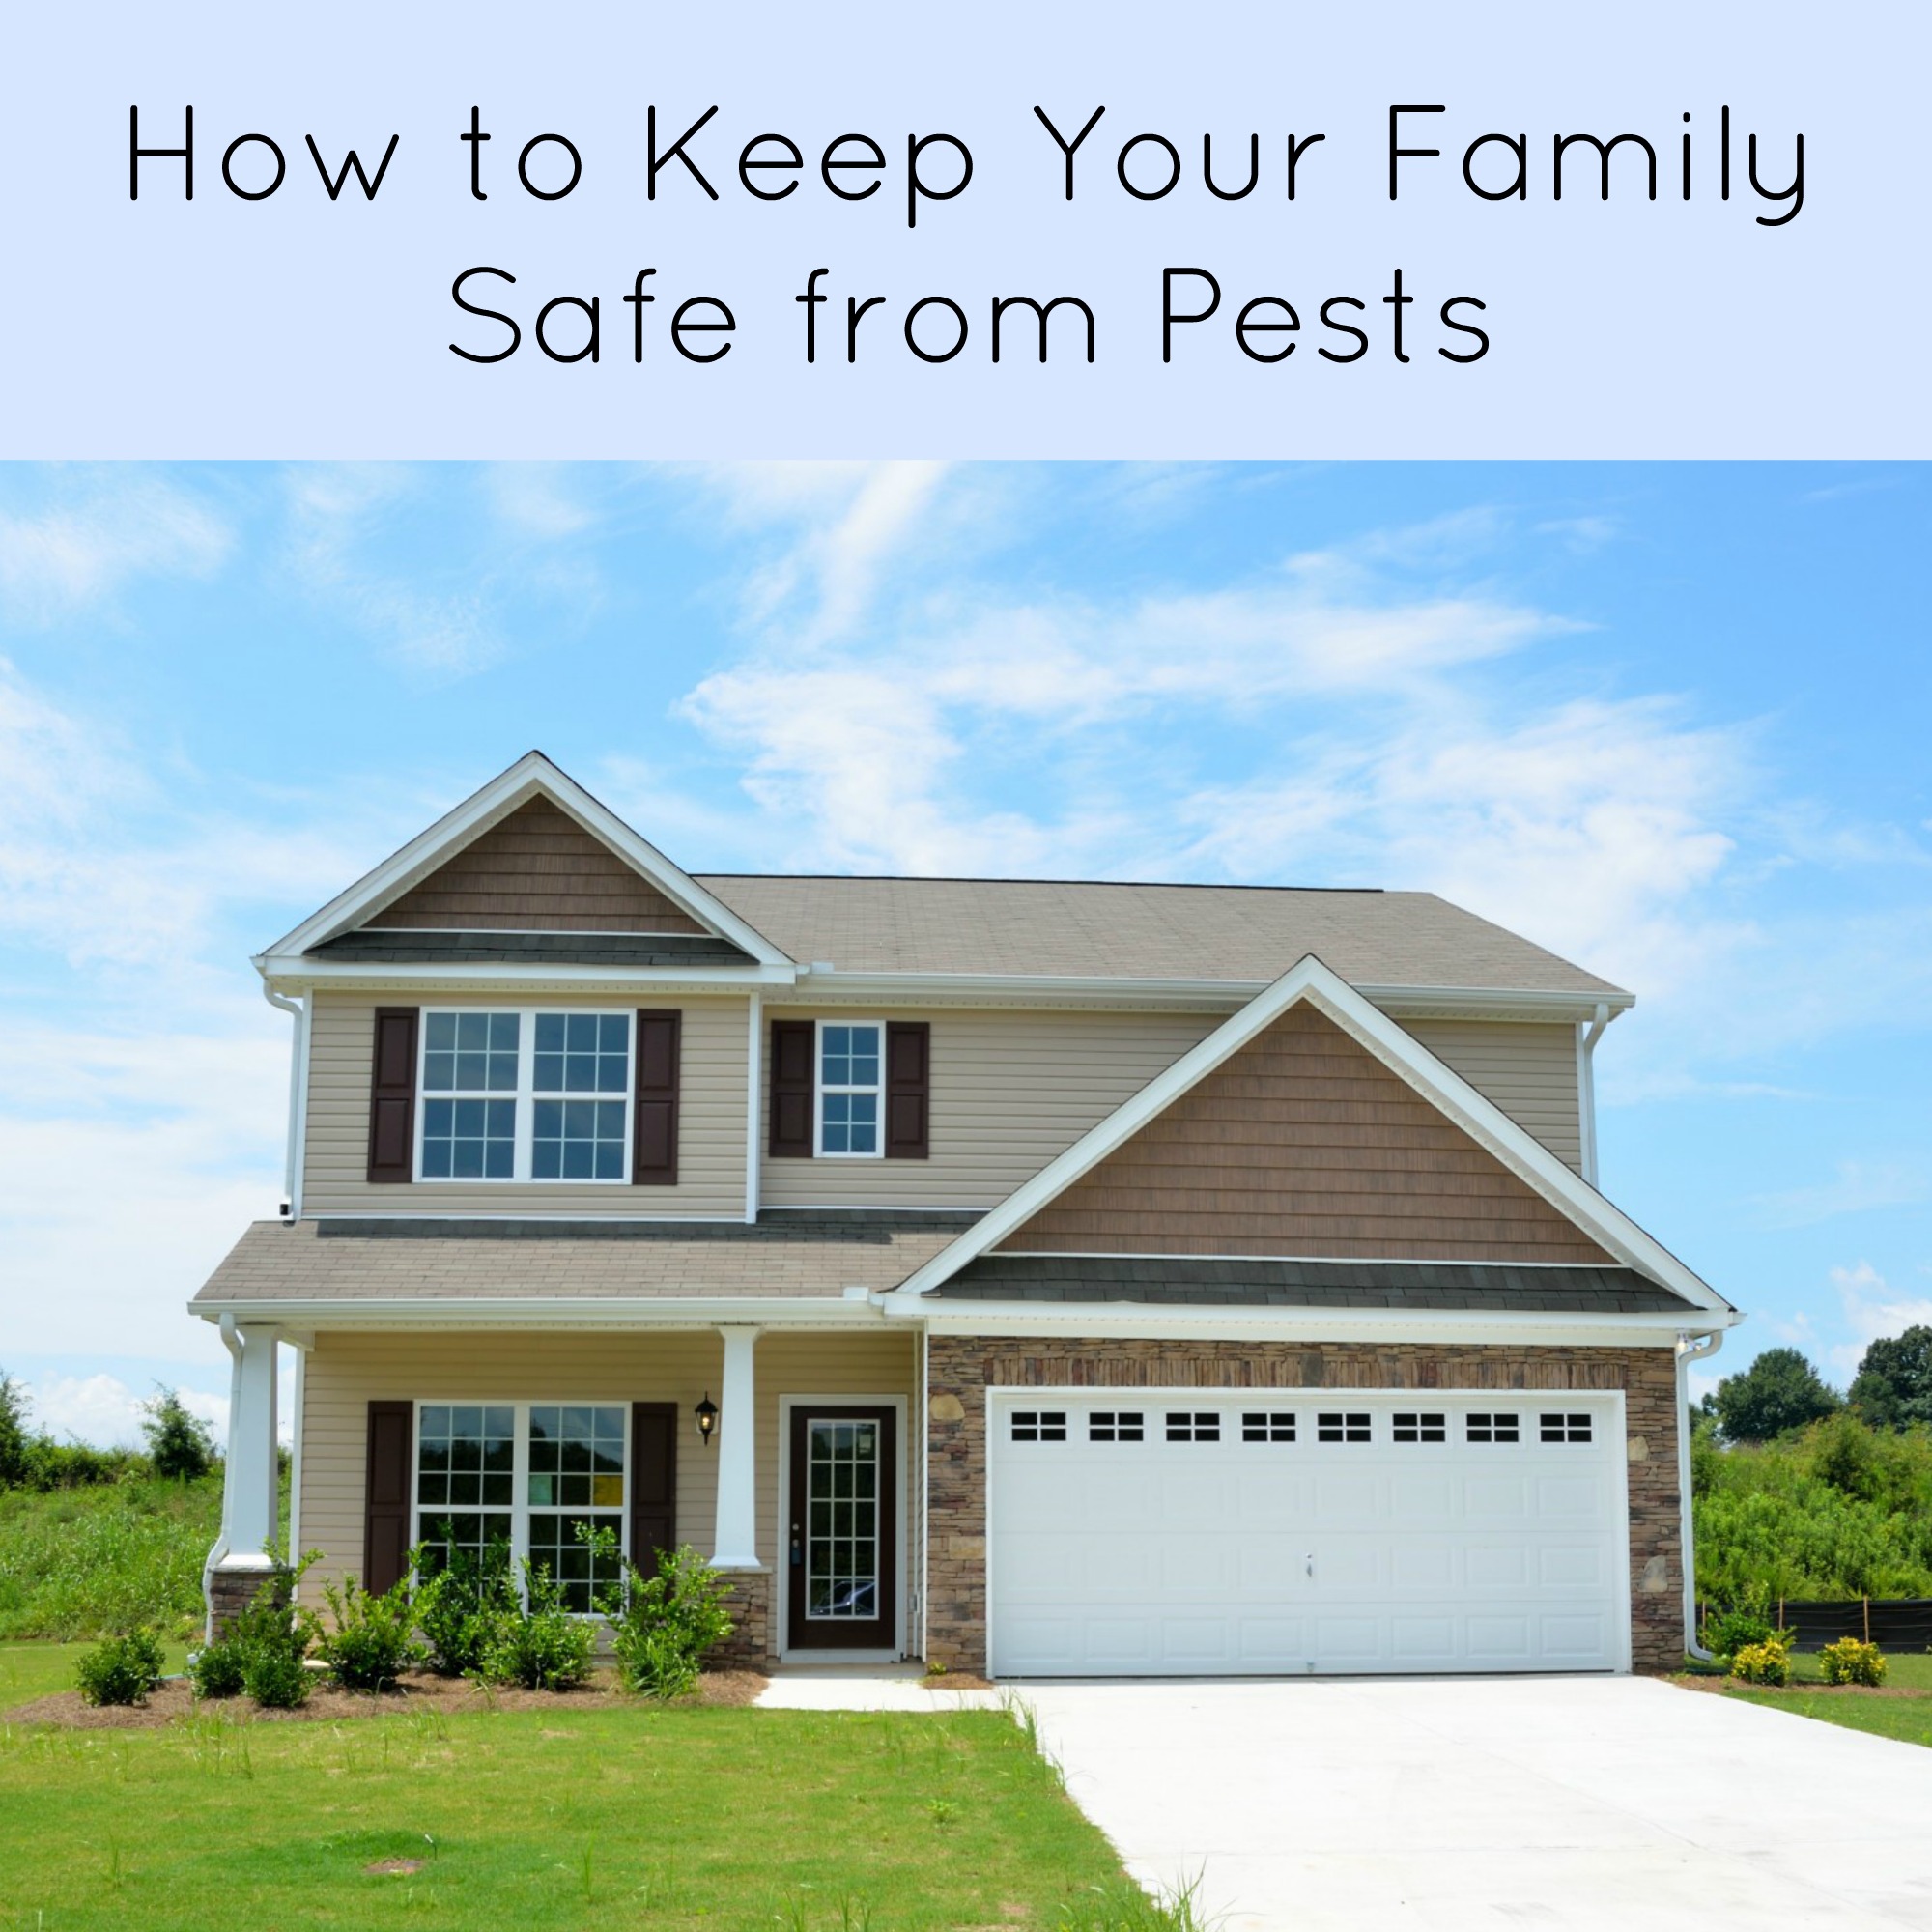 How to Keep Your Family Safe from Pests